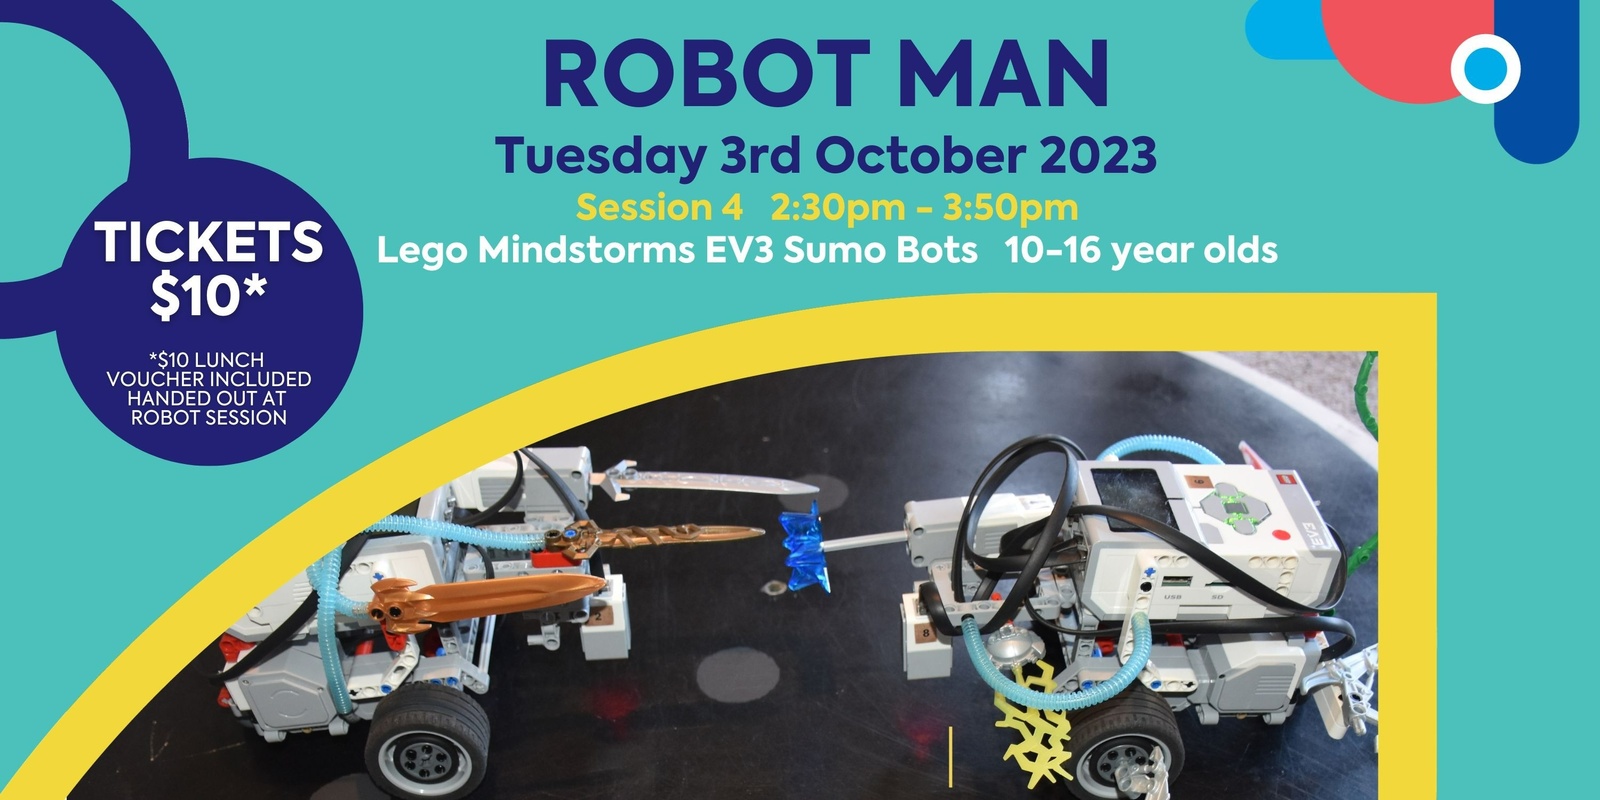 Banner image for Robot Man @ Meadow Mews Plaza - Session 4 Lego Mindstorms EV3 Sumo Bots 10-16 yrs